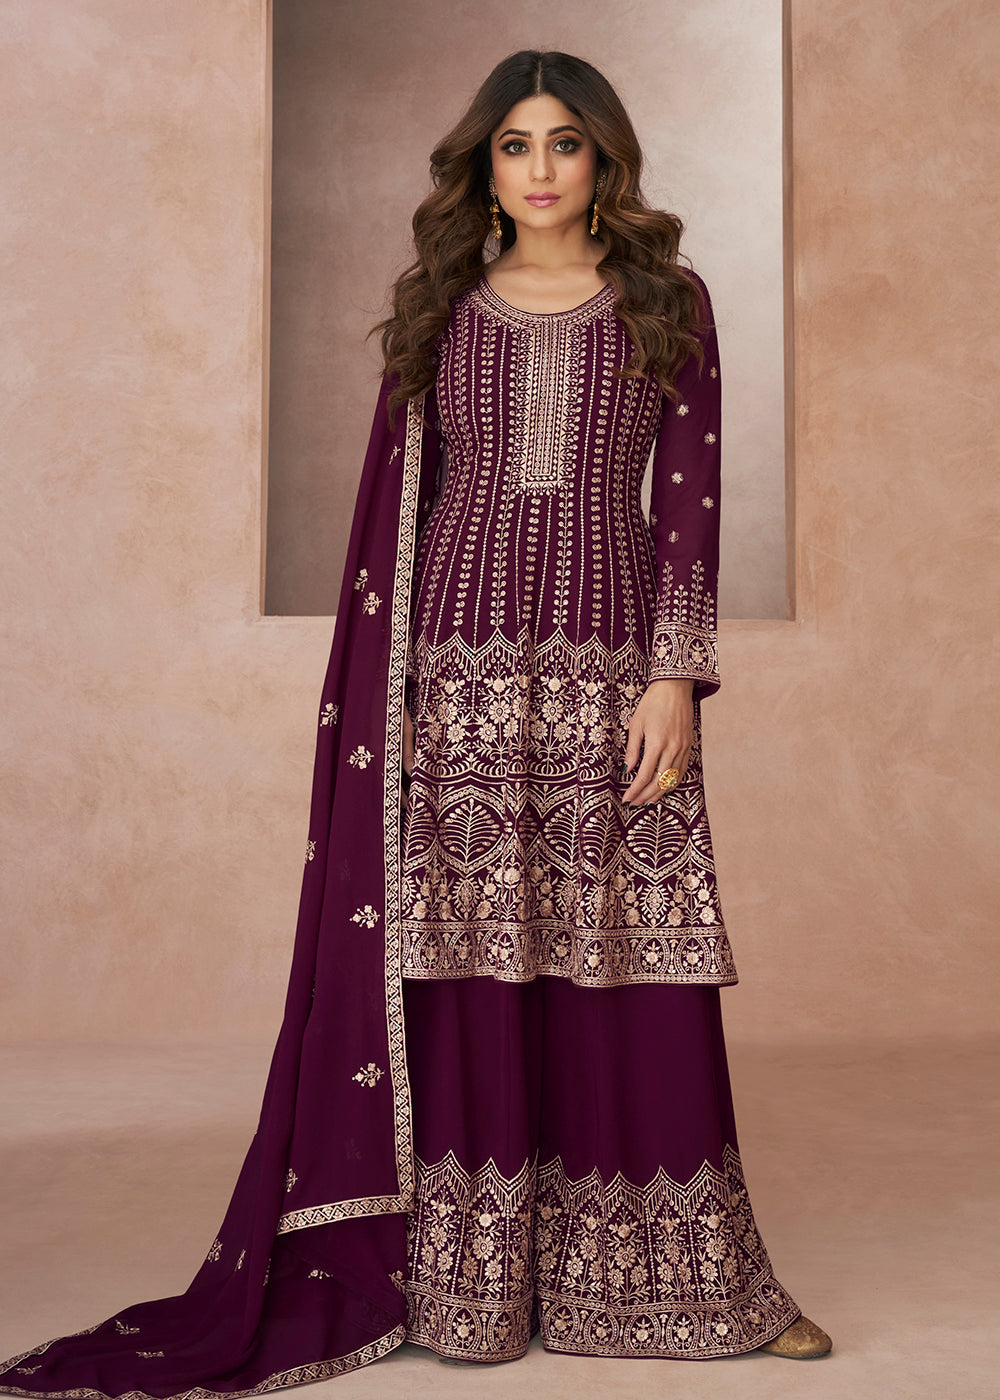 Buy Now Supreme Festive Look Purple Georgette Palazzo Style Suit Online in USA, UK, Canada, Germany, Australia & Worldwide at Empress Clothing.